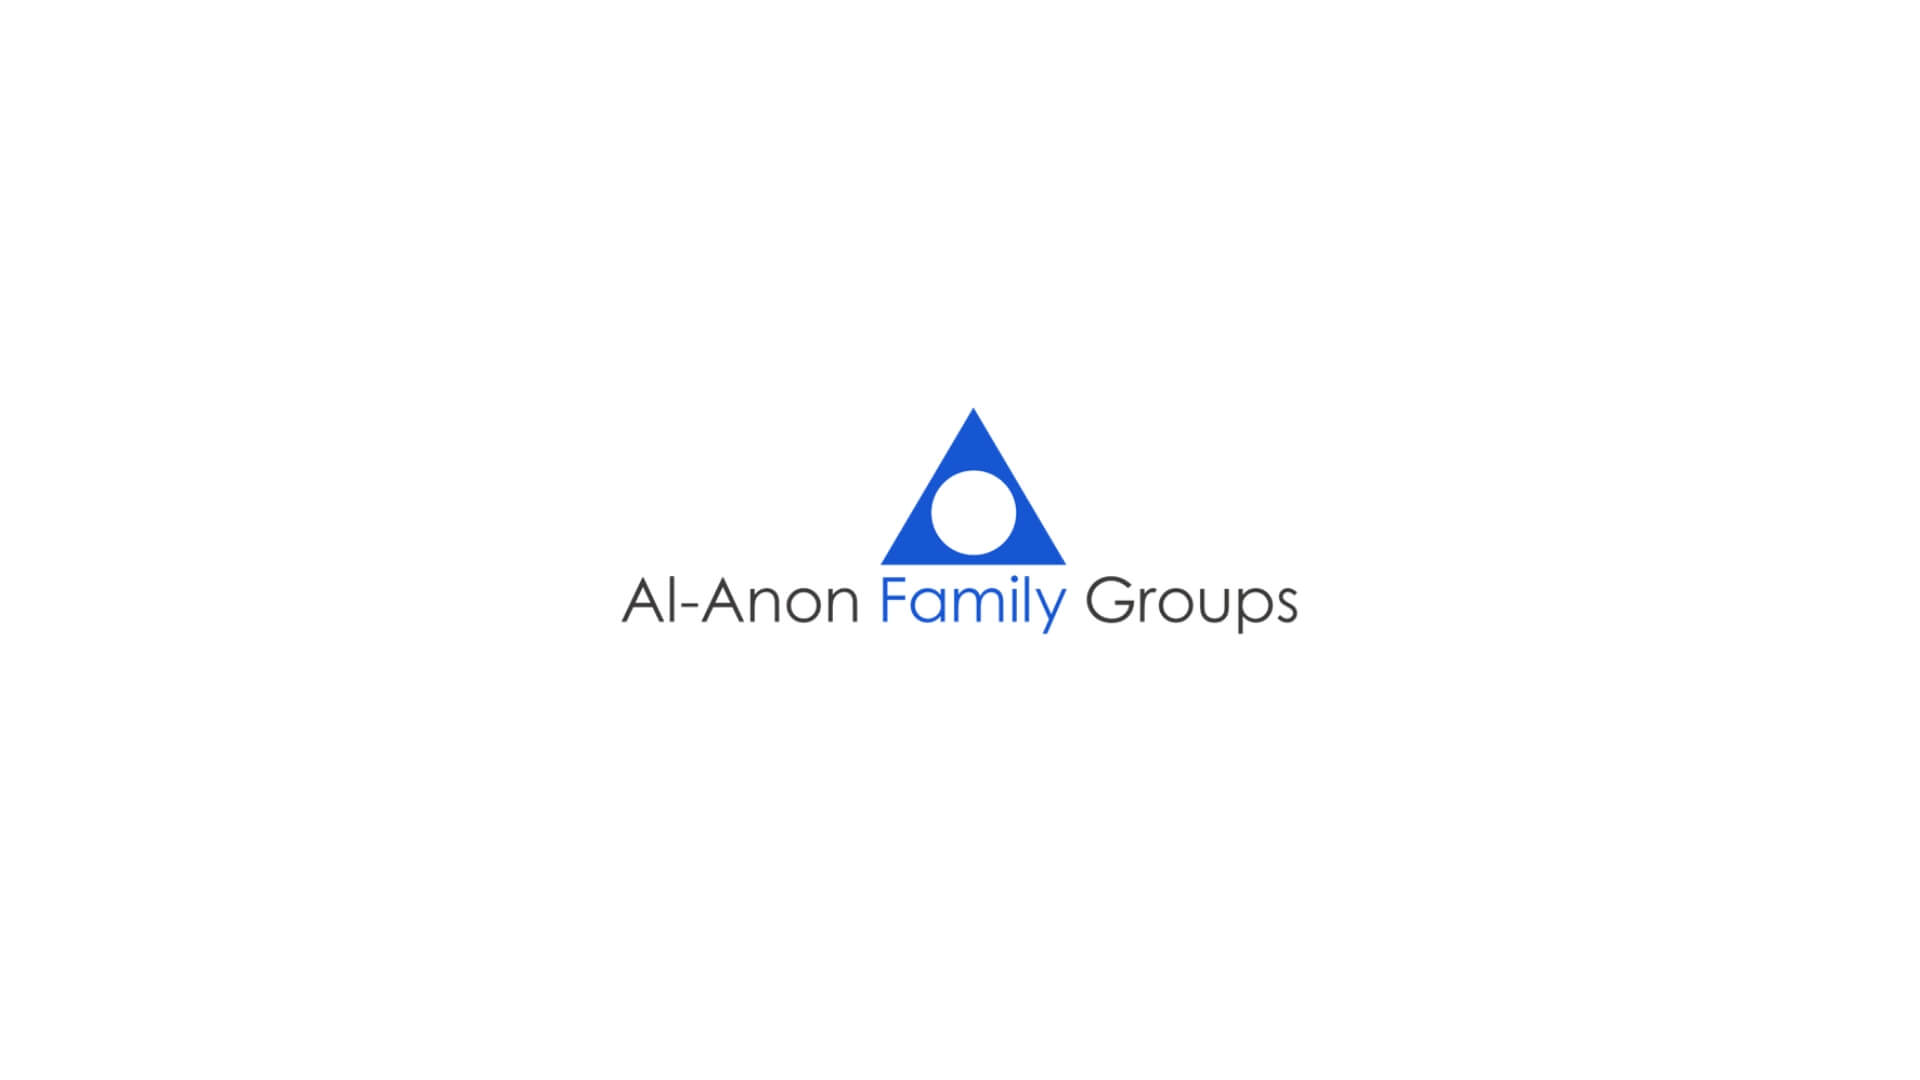 Timmins Care Logo of al-anon family groups featuring a blue triangle inside a circle on a white background, with the organization's name below it. Cochrane District Social Services Administration Board